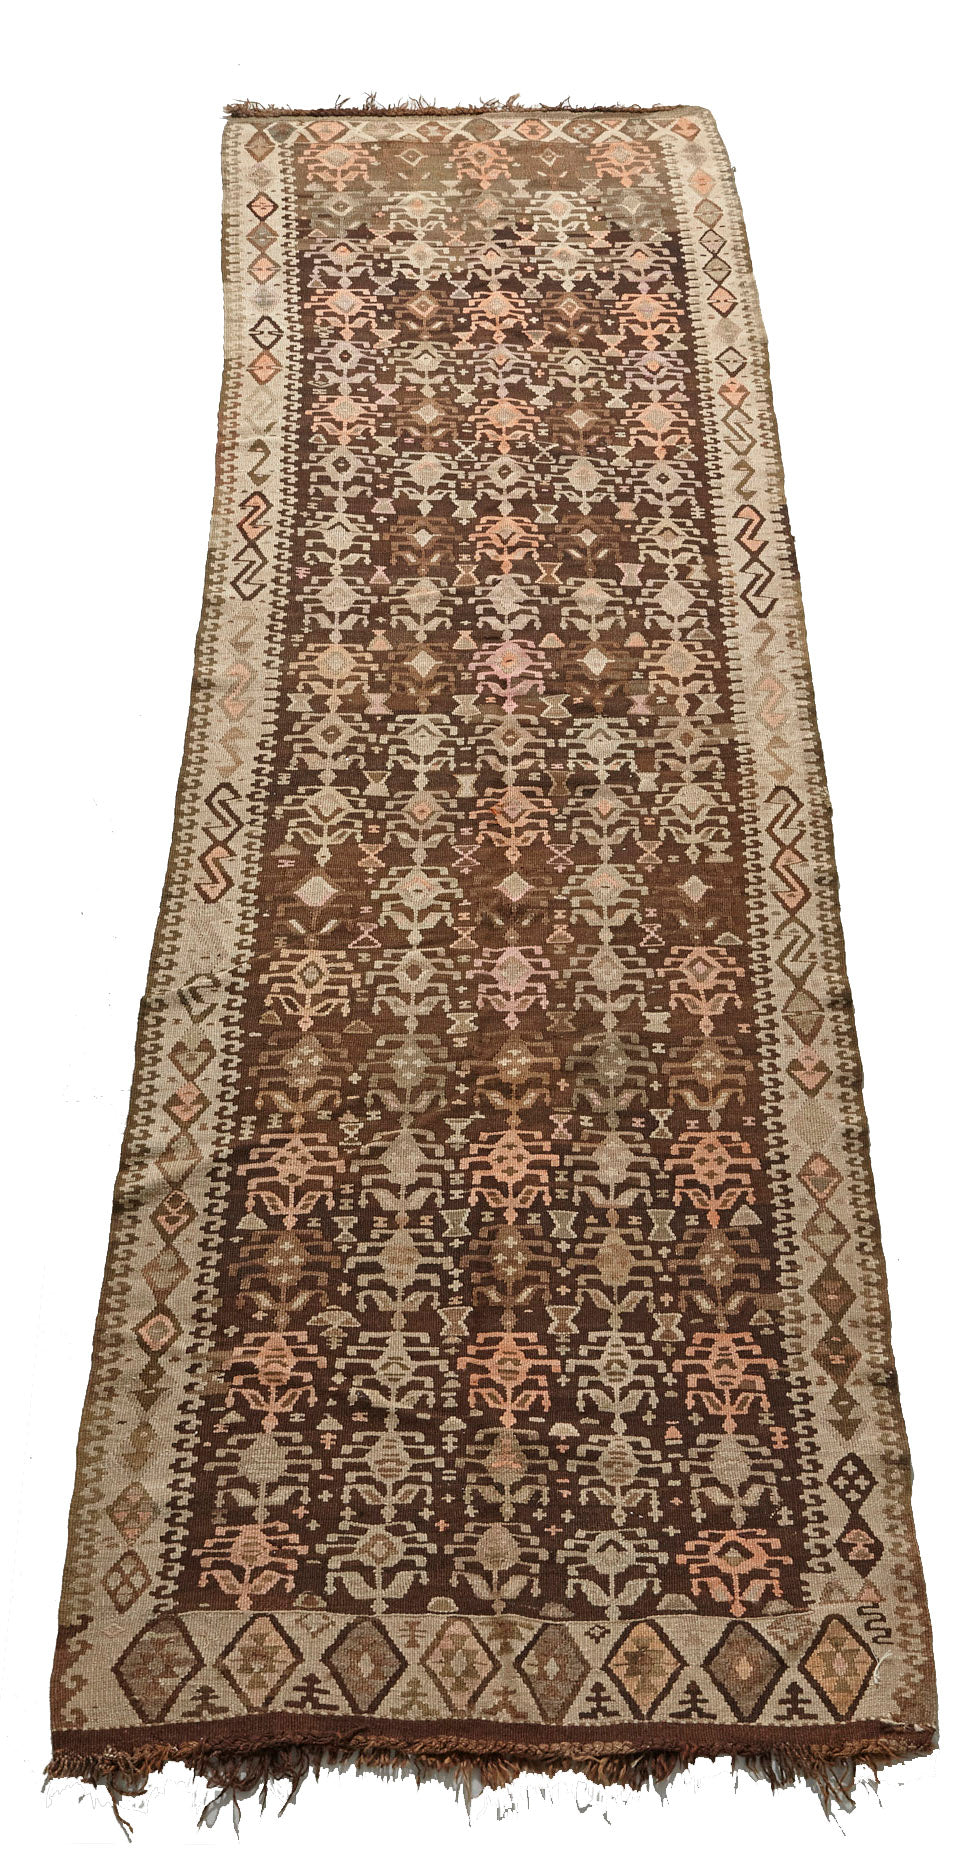 Kilim hand woven antique Persian Rug in neutral earth tones. Runner rug, perfect for a hallway or kitchen rug - Available from King Kennedy Rugs Los Angeles 